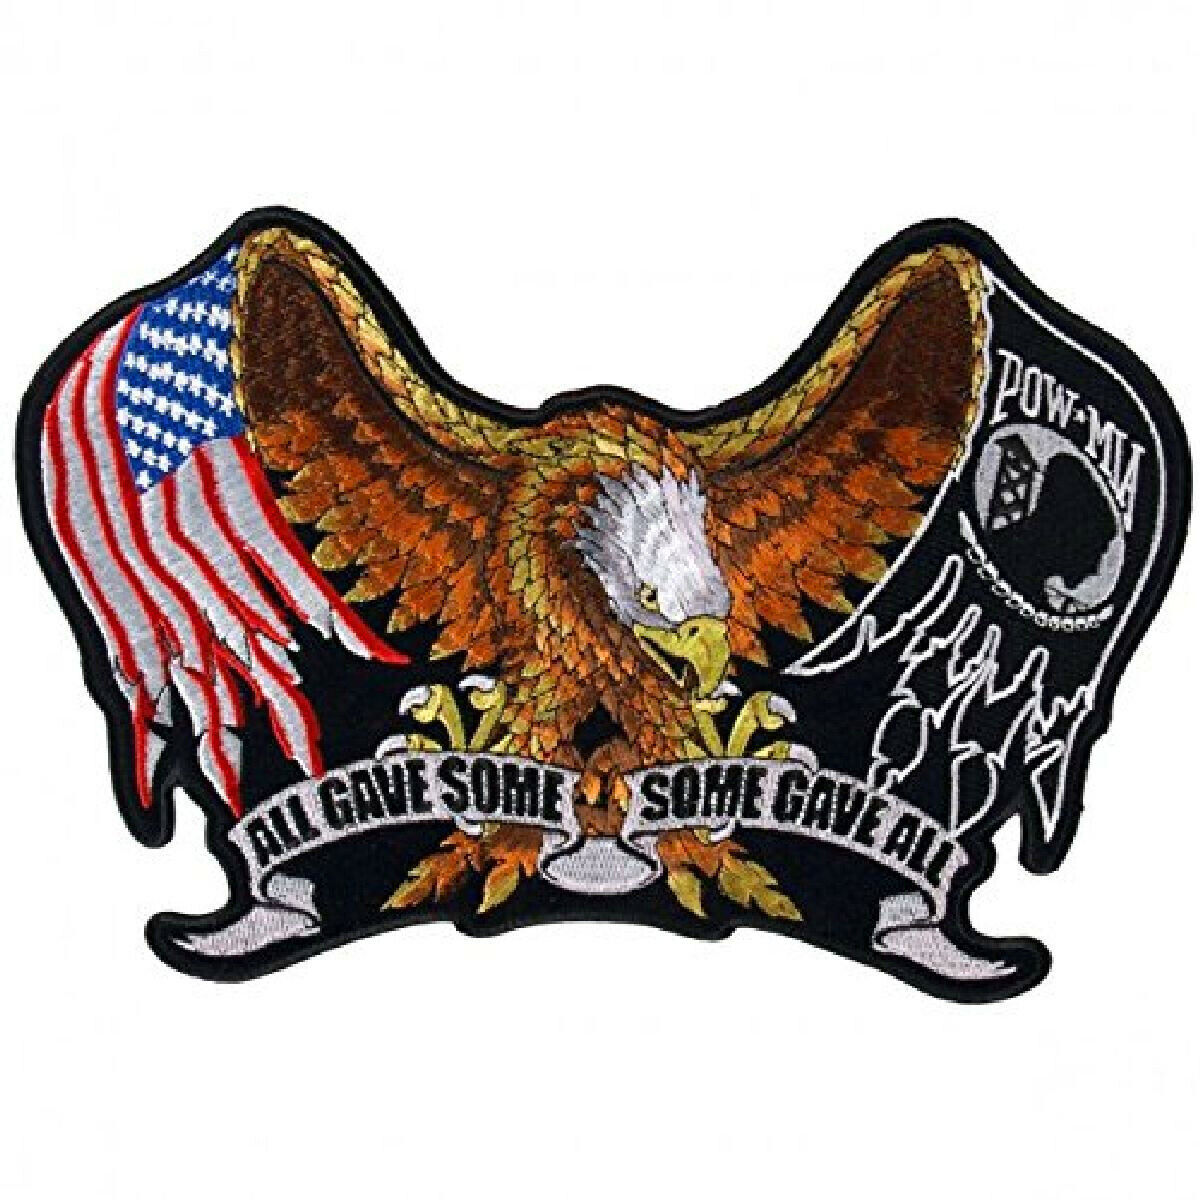 Pow Mia Eagle All Gave Some US Flag JACKET BACK PATCH [14.5 X 9.5 inch]